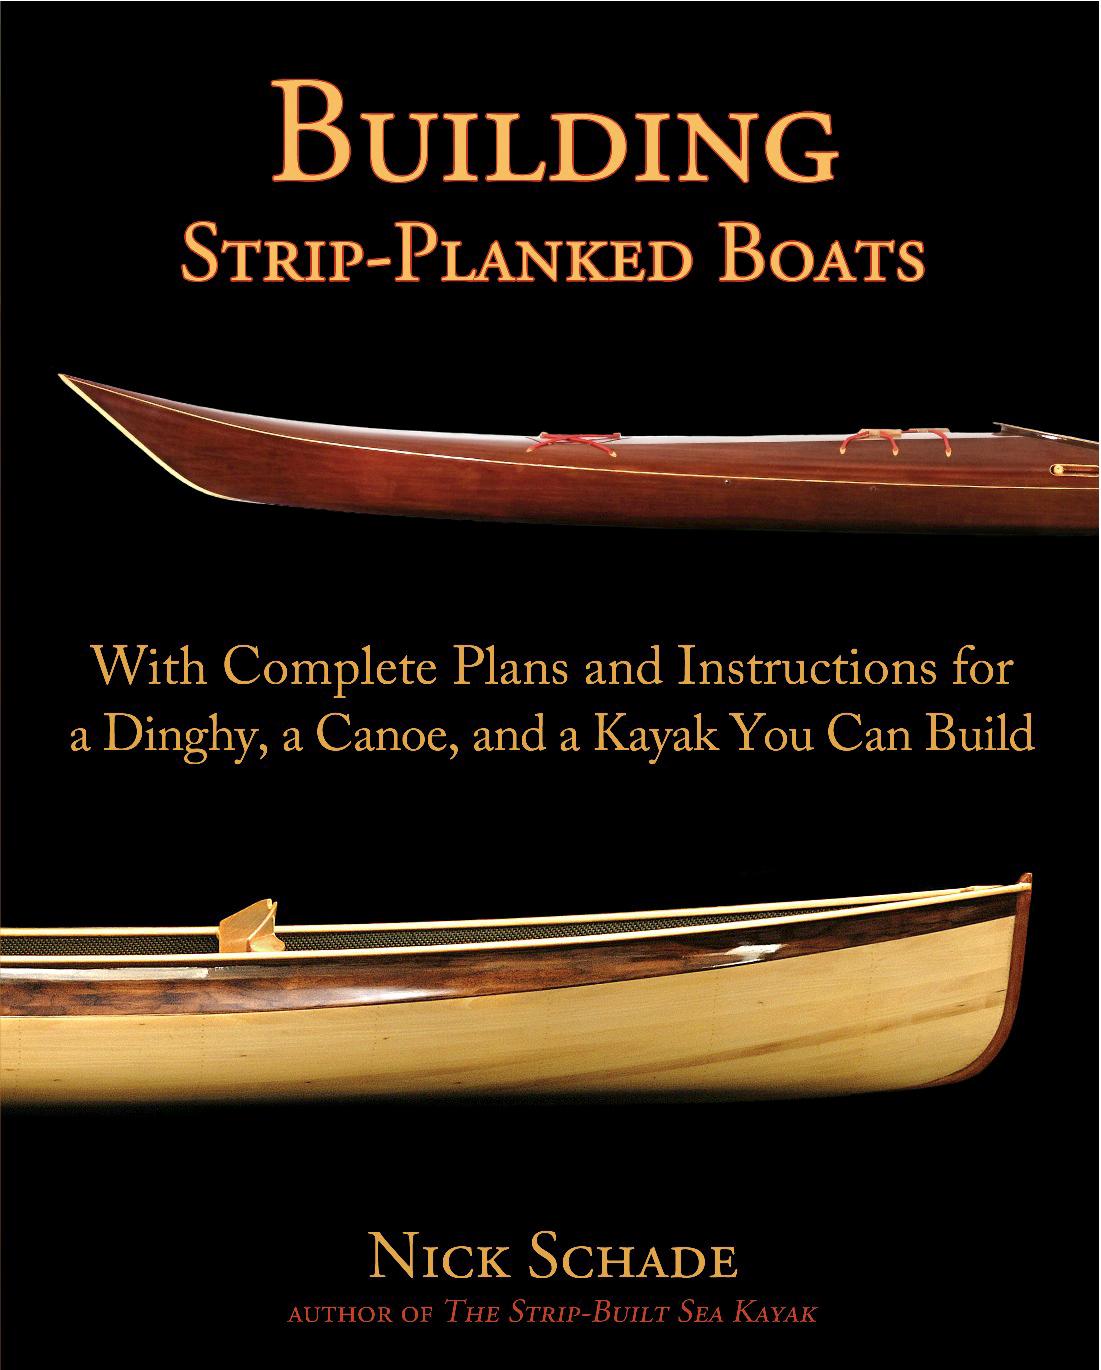 From "Building Strip-Planked Boats"